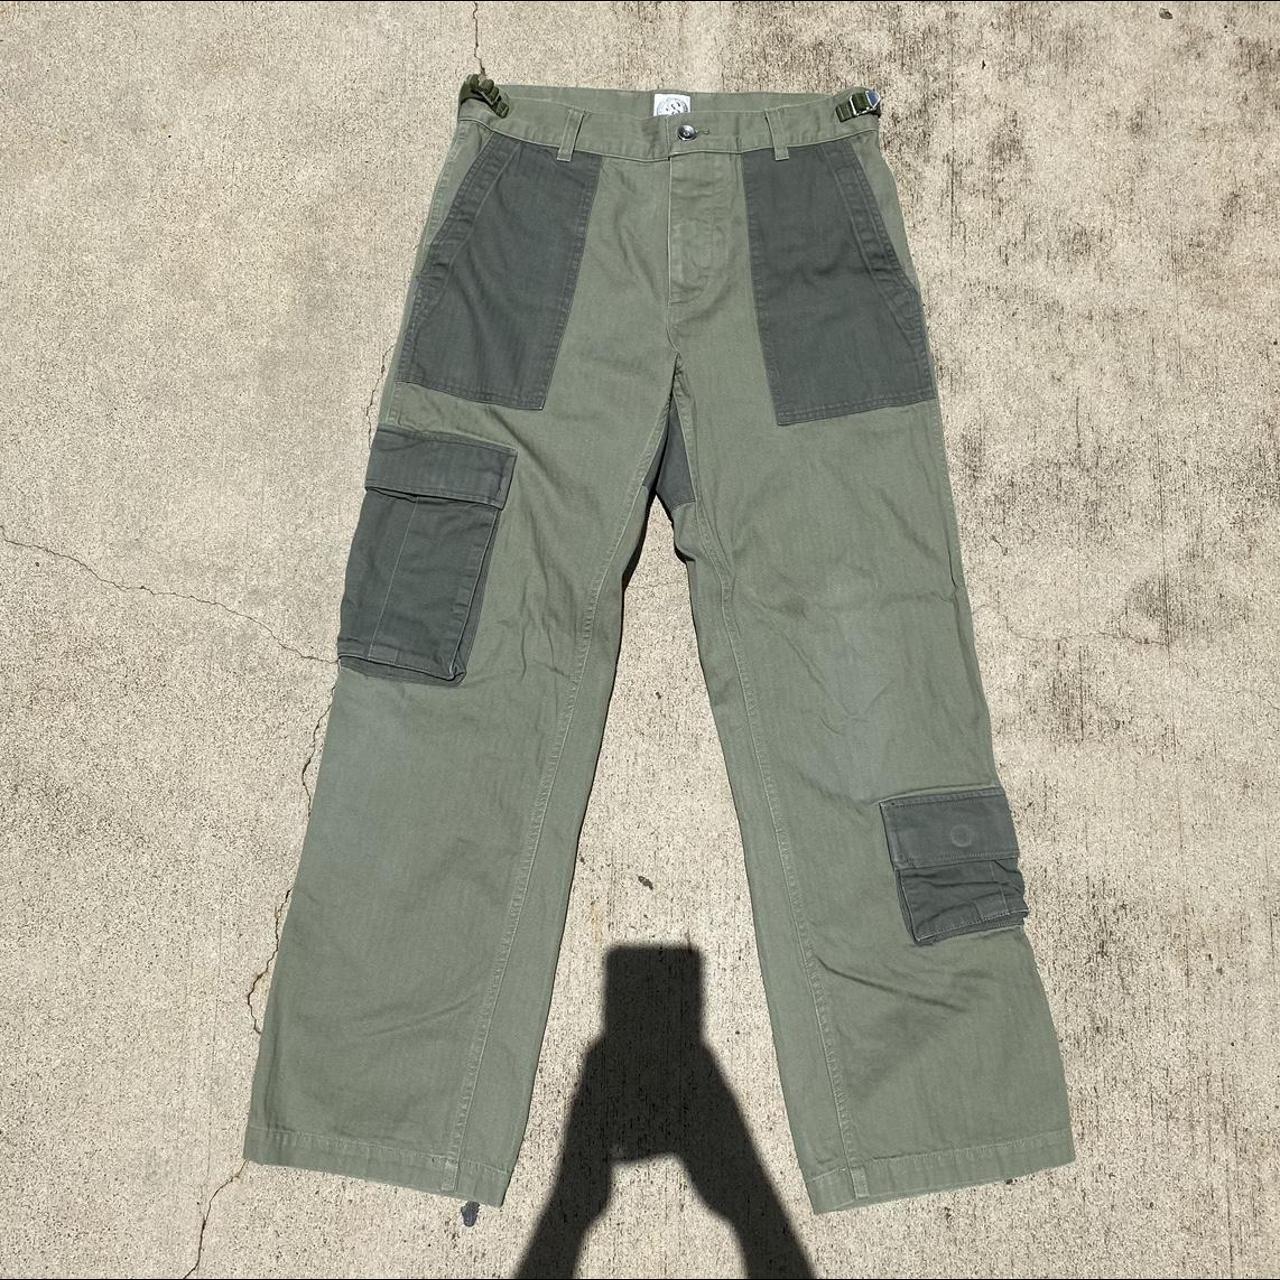 Simply Complicated Cargo Pants, Size: 30x30 with...